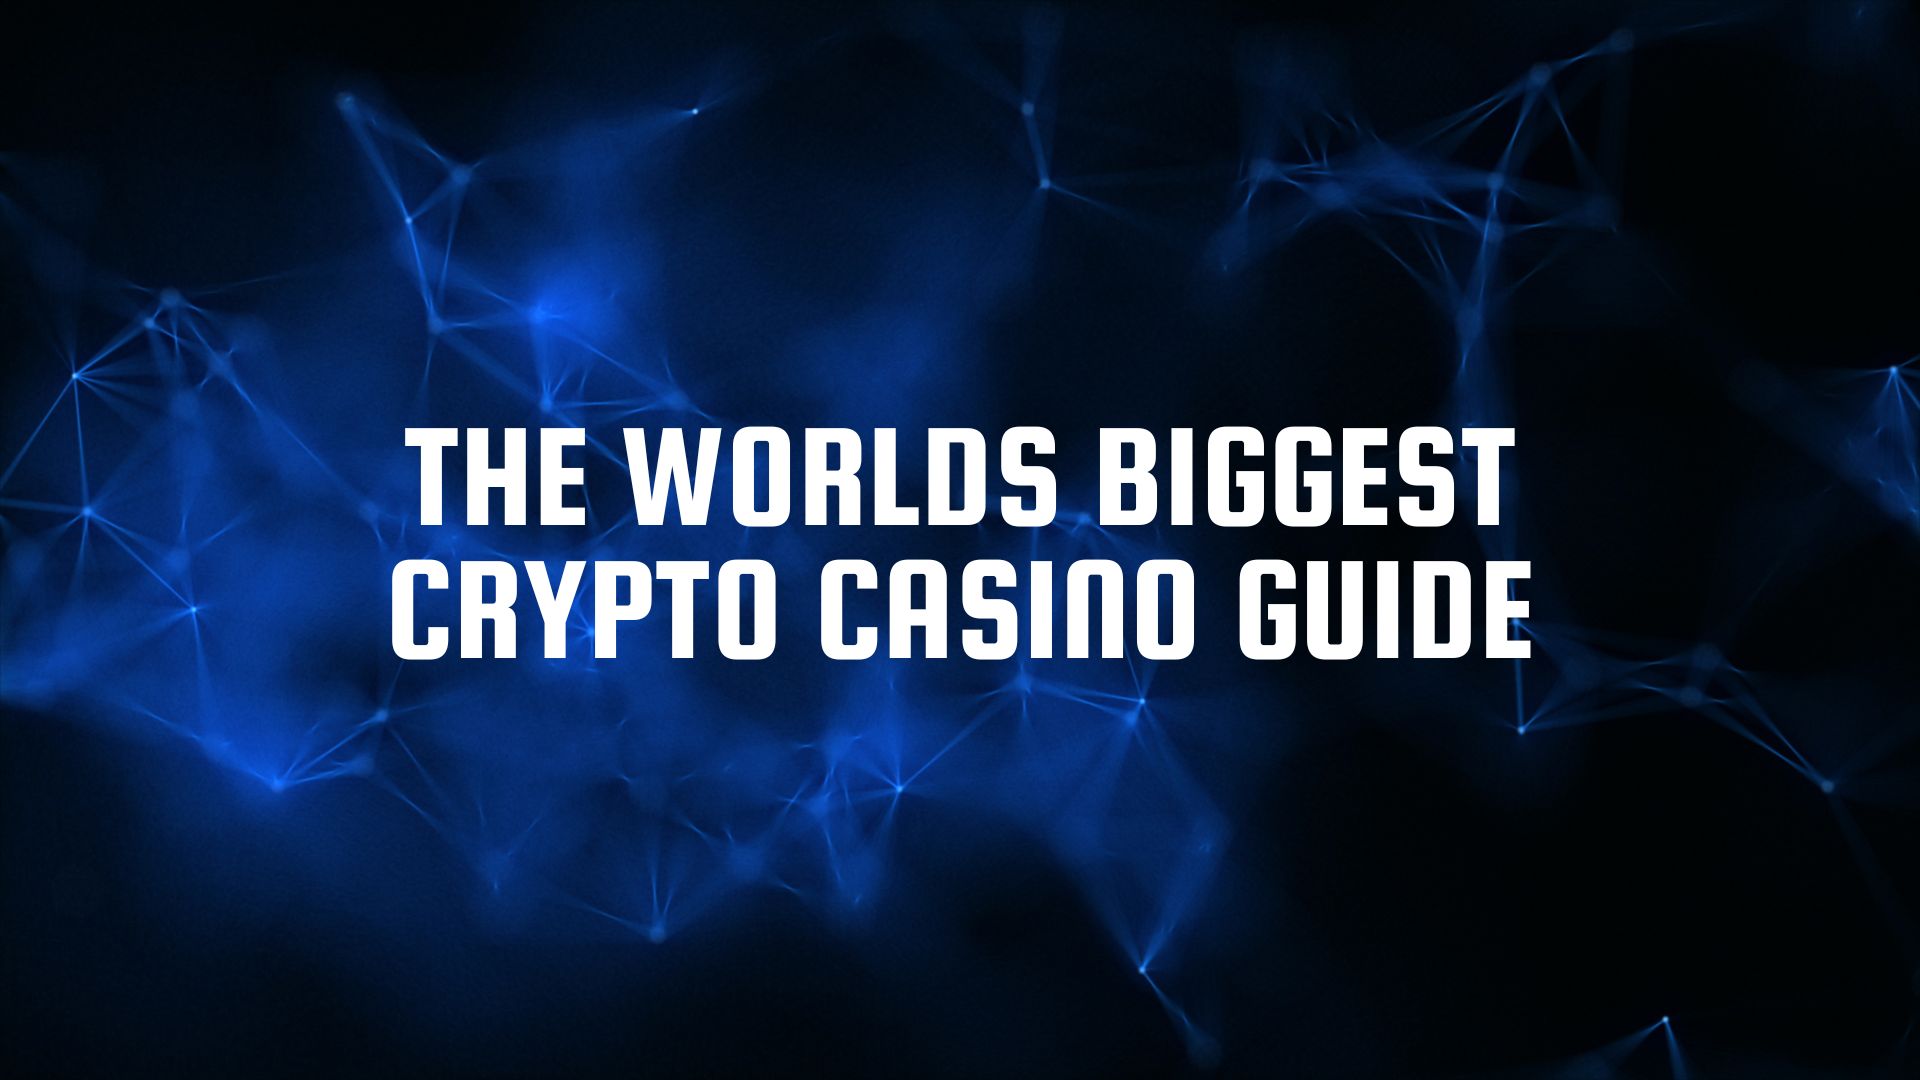 3 Kinds Of bitcoin casino: Which One Will Make The Most Money?